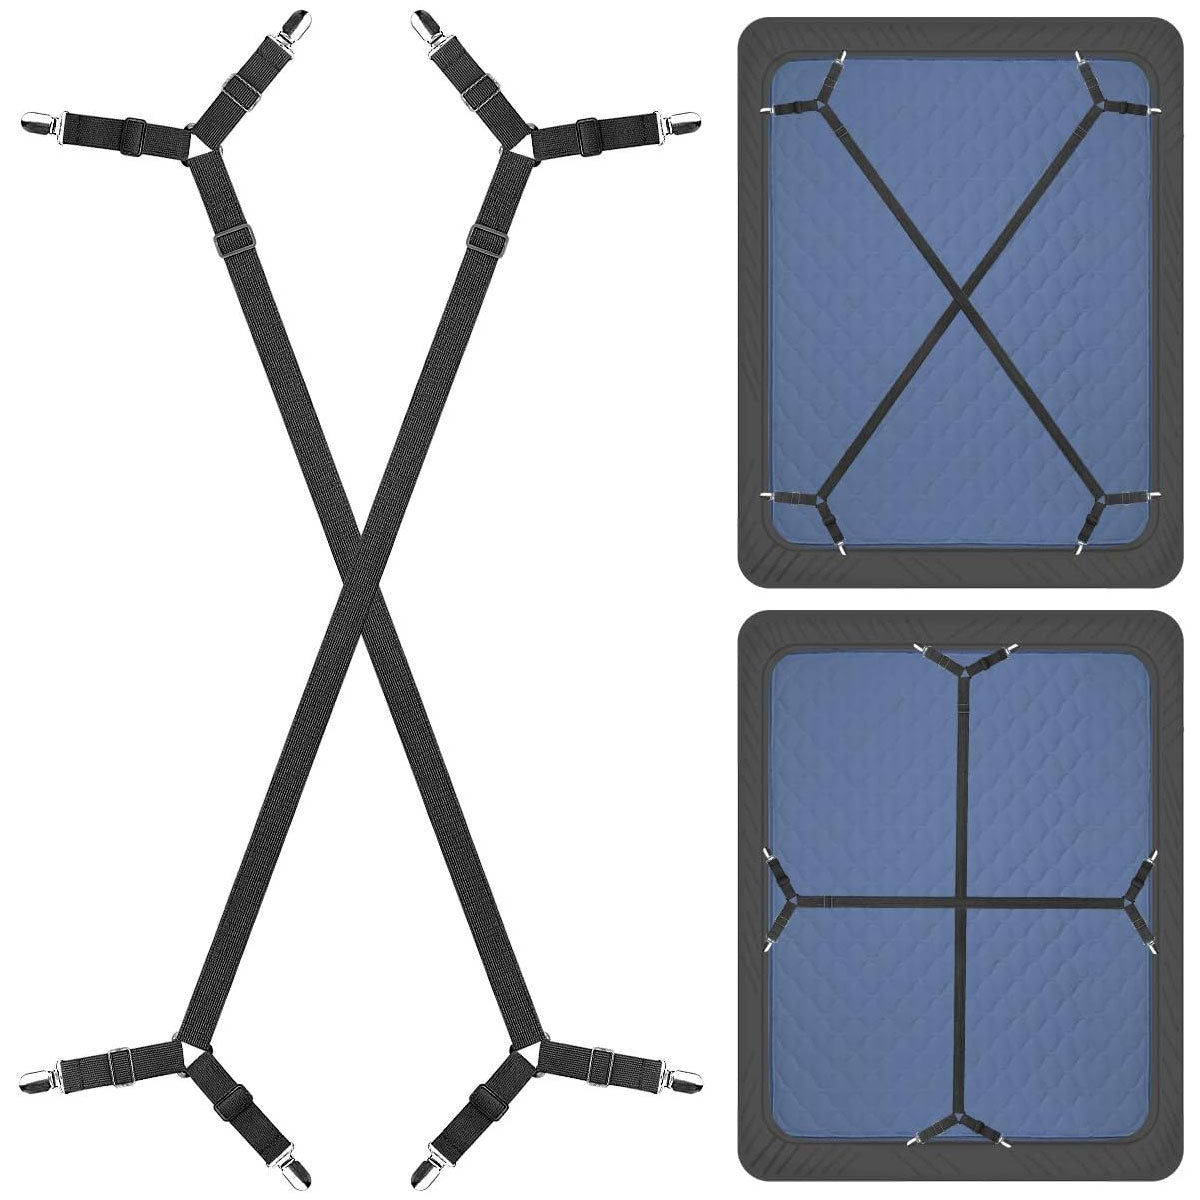 4PCS Bed Sheet Clips Keep Bedsheets in Place - Corner Bands Suspenders for  Flat Or Fitted Sheets - Mattress Sheets Grippers Holders Straps Fits from  Twin to Queen to King - Garters